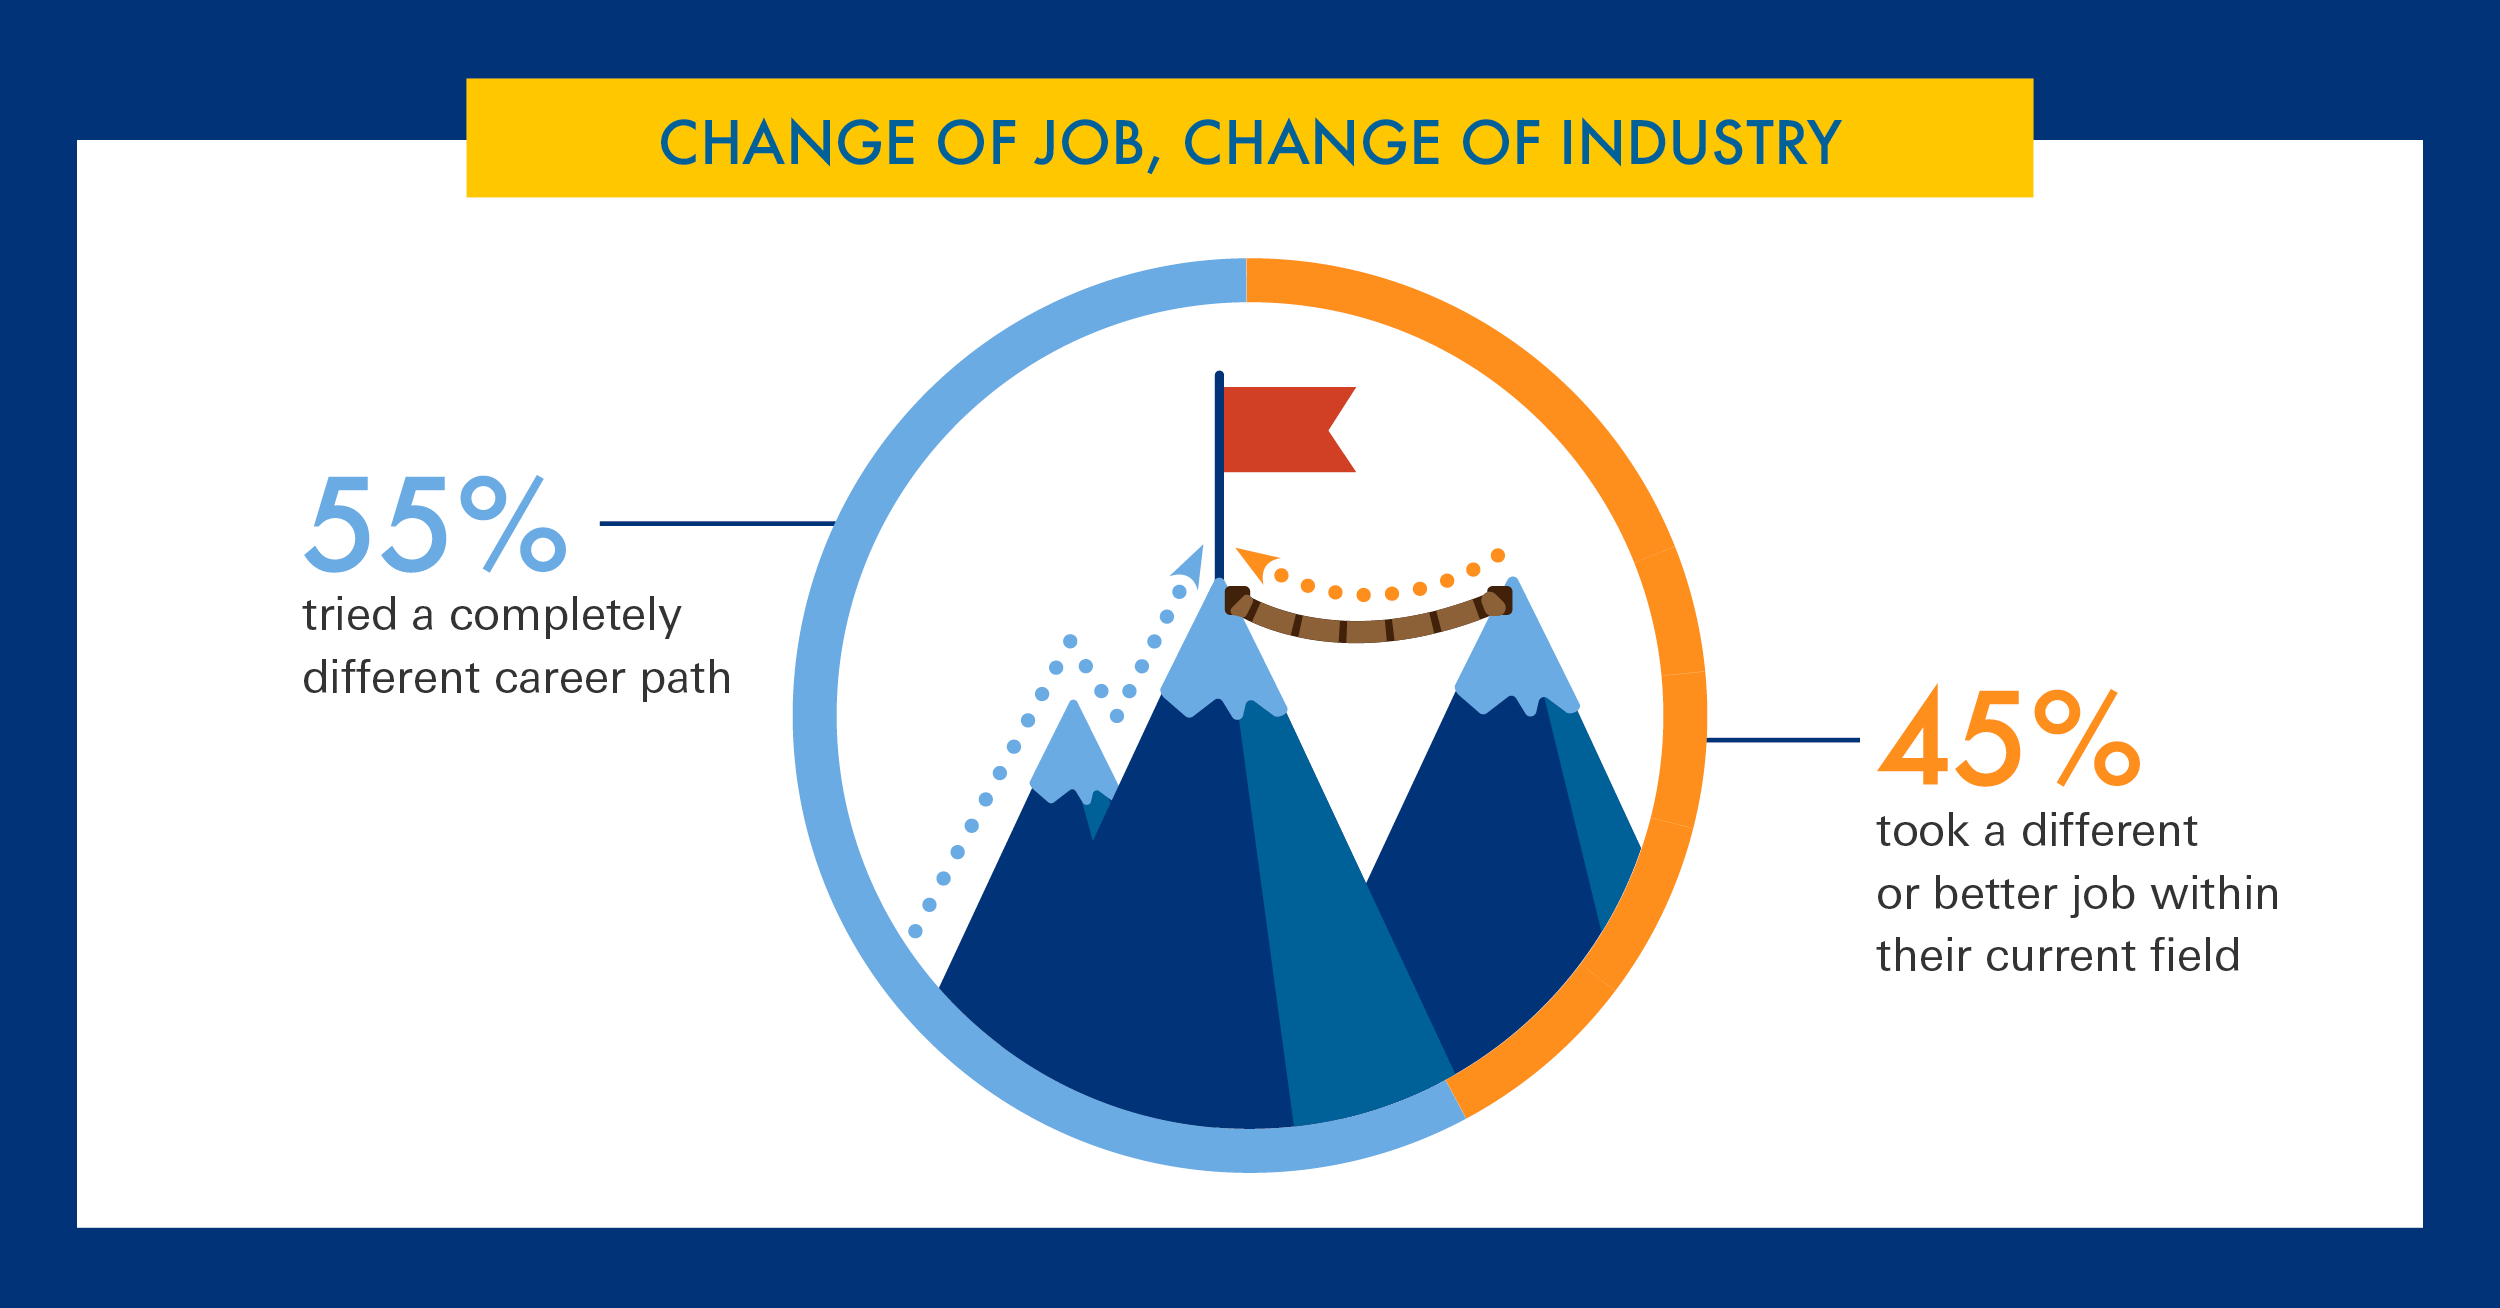 Change of job, change of industry. 55% of people tried a completely different career path.